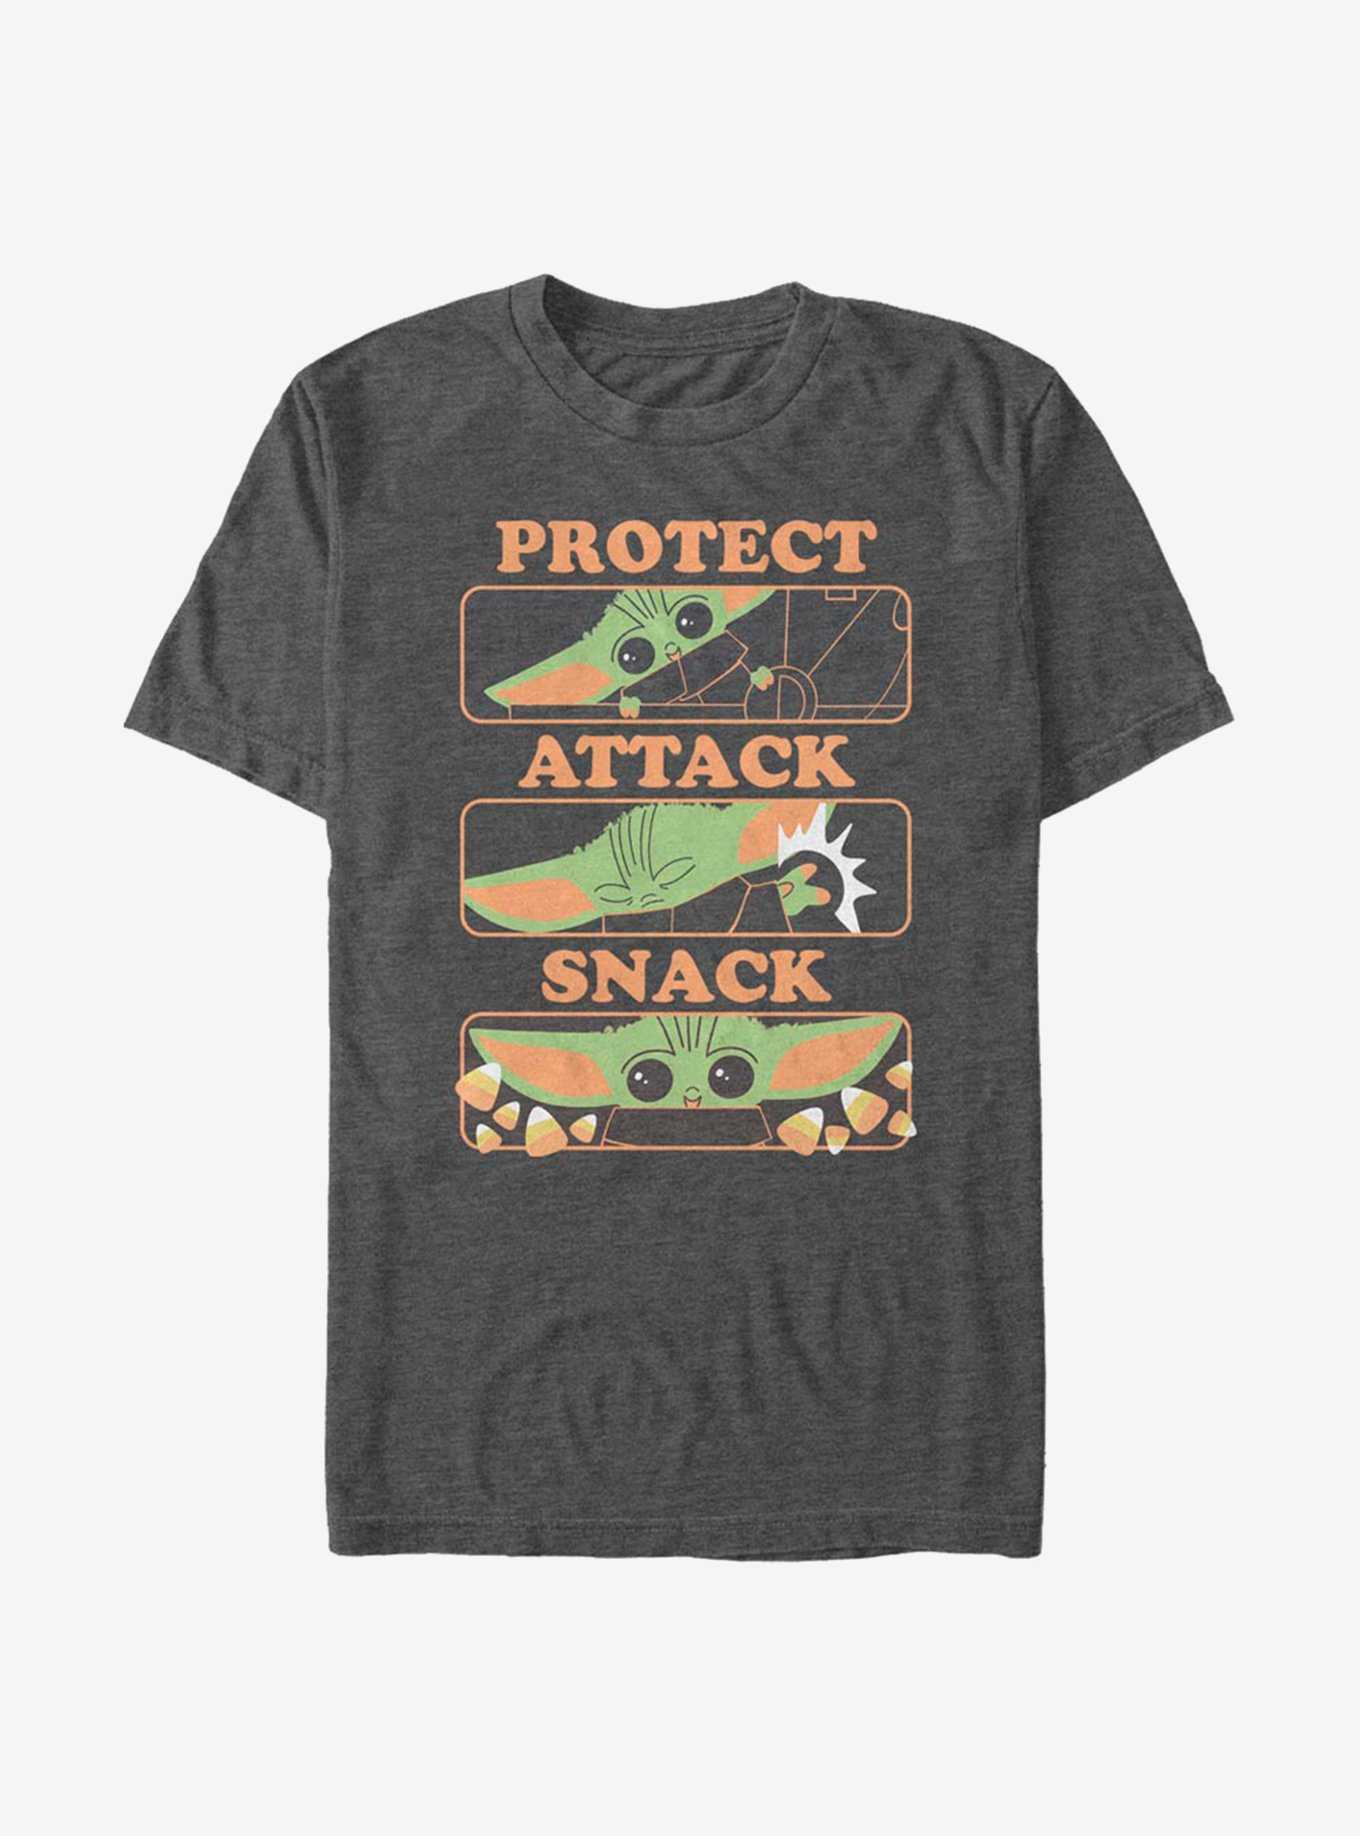 Star Wars The Mandalorian The Child Protect And Snack T-Shirt, , hi-res